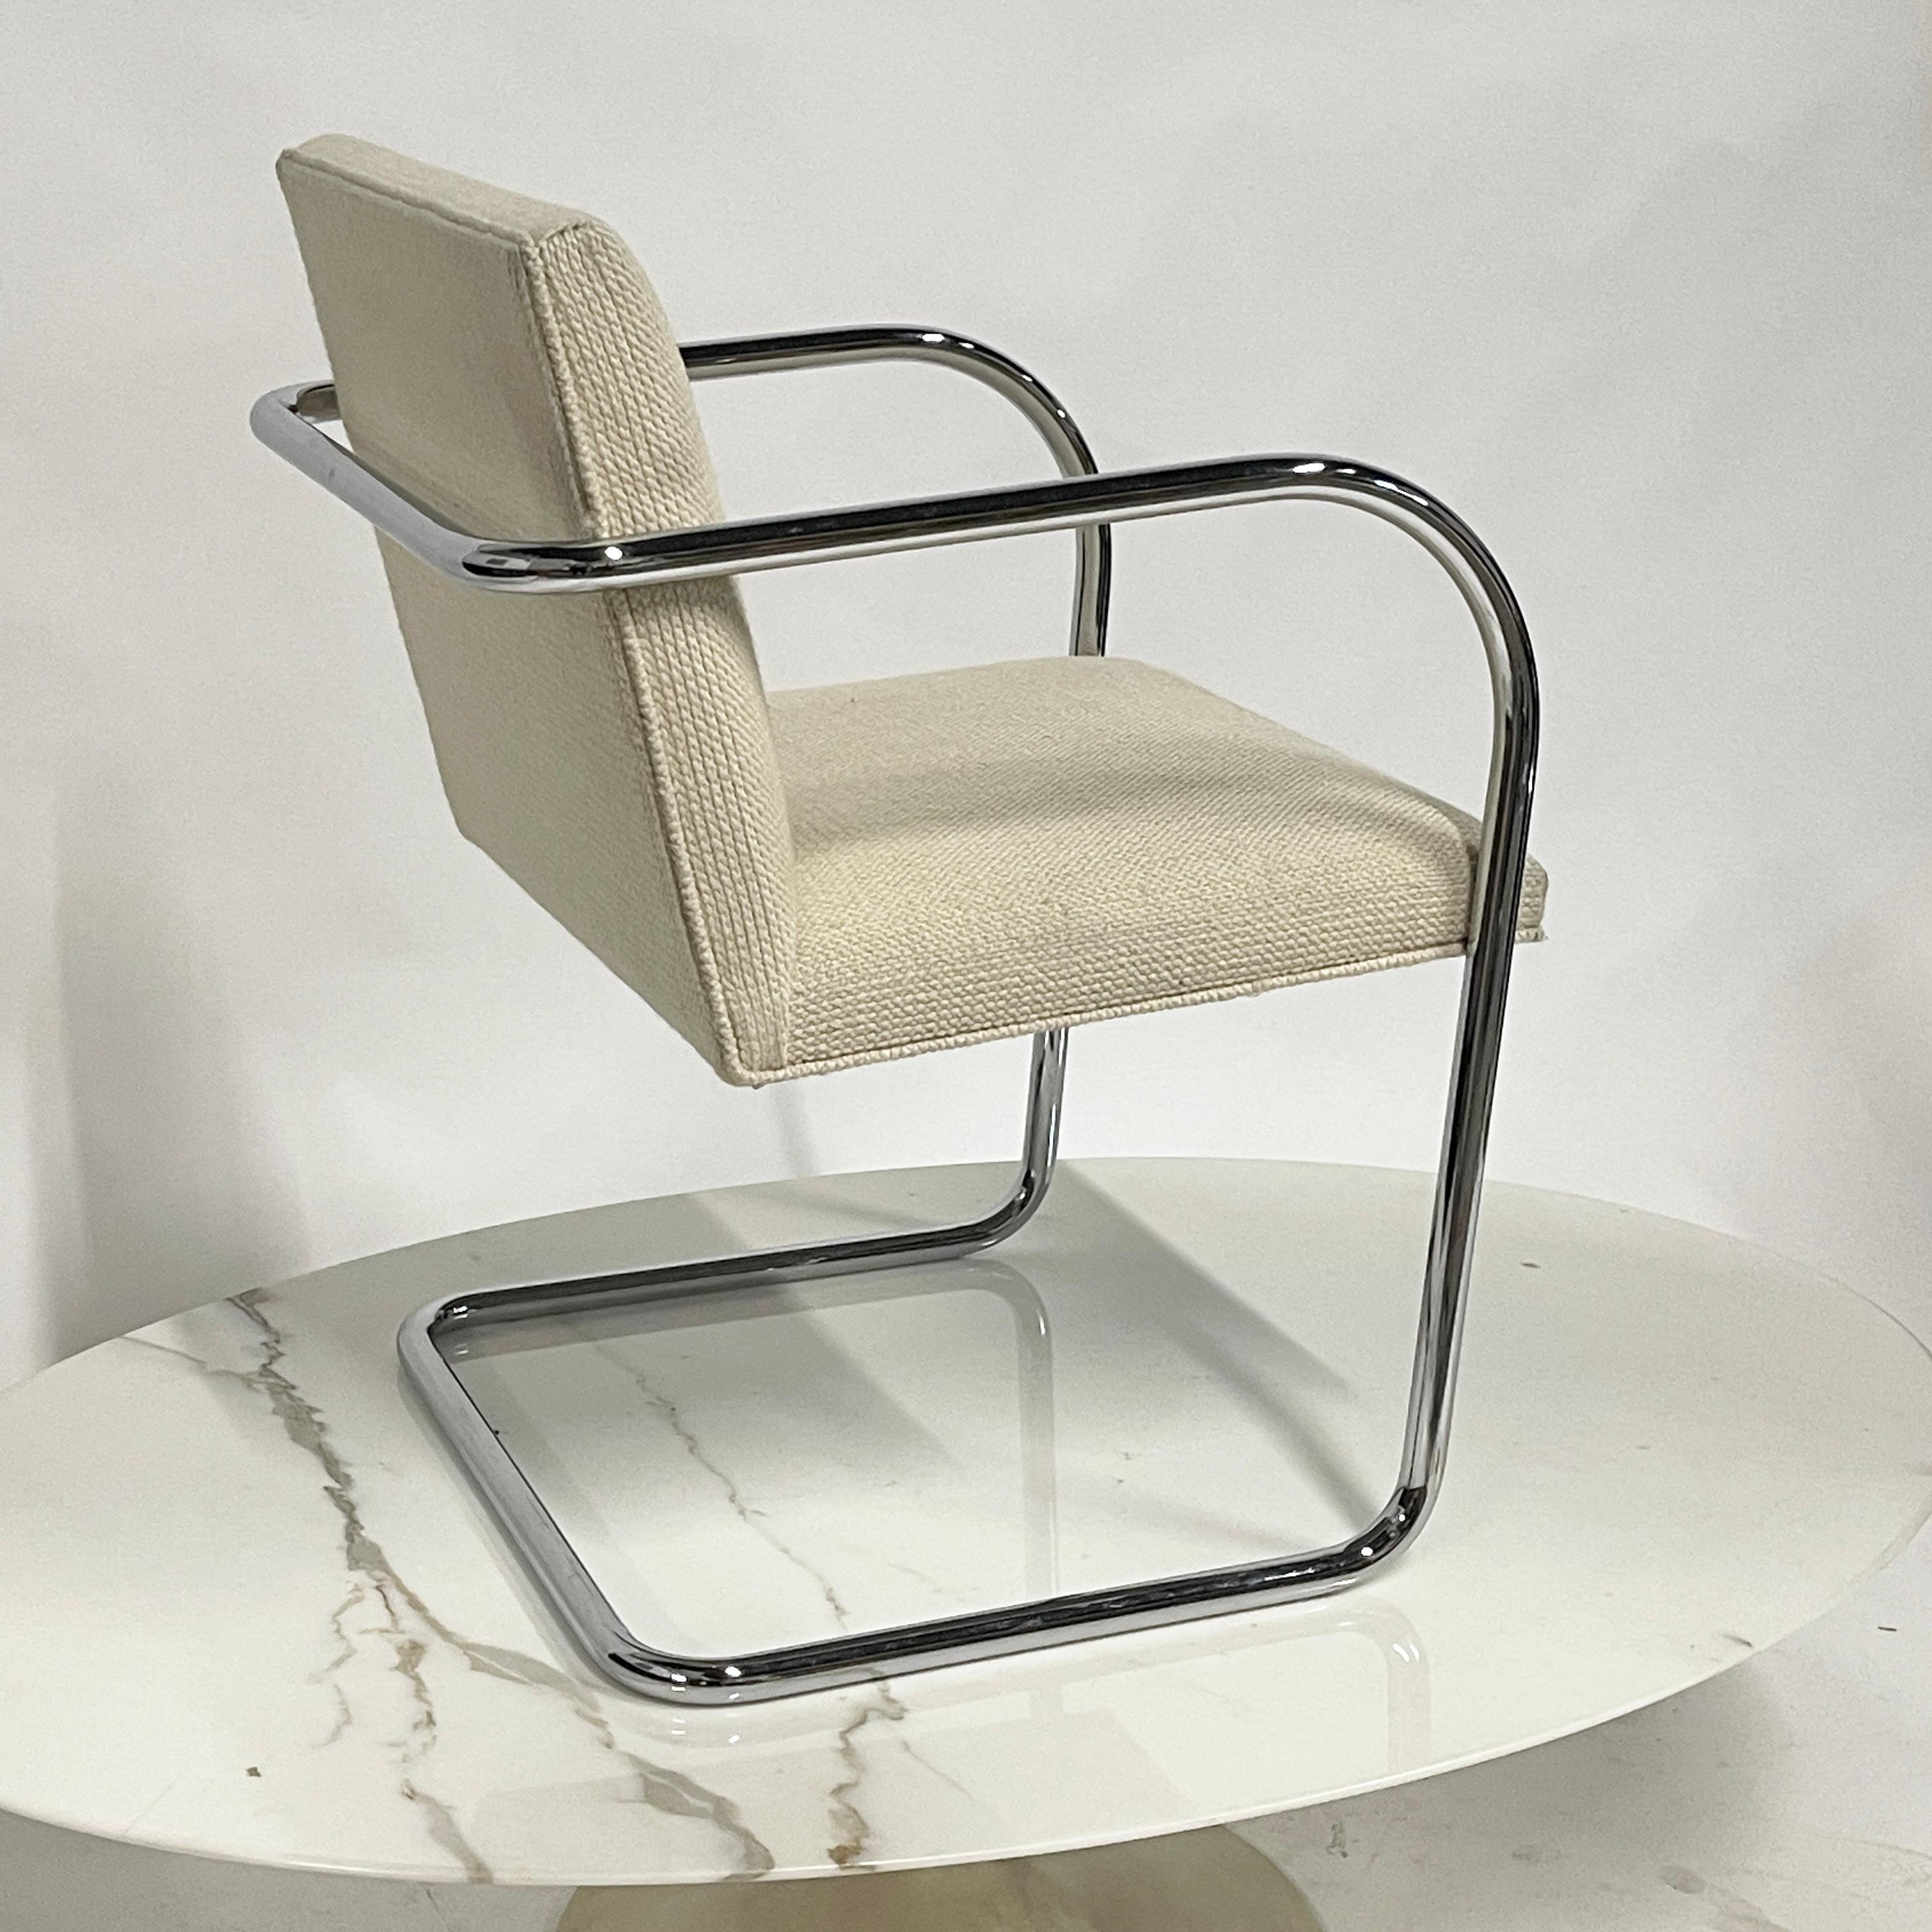 20th Century Mies Van Der Rohe for Knoll Brno Chair in Cato Upholstery 60 available For Sale